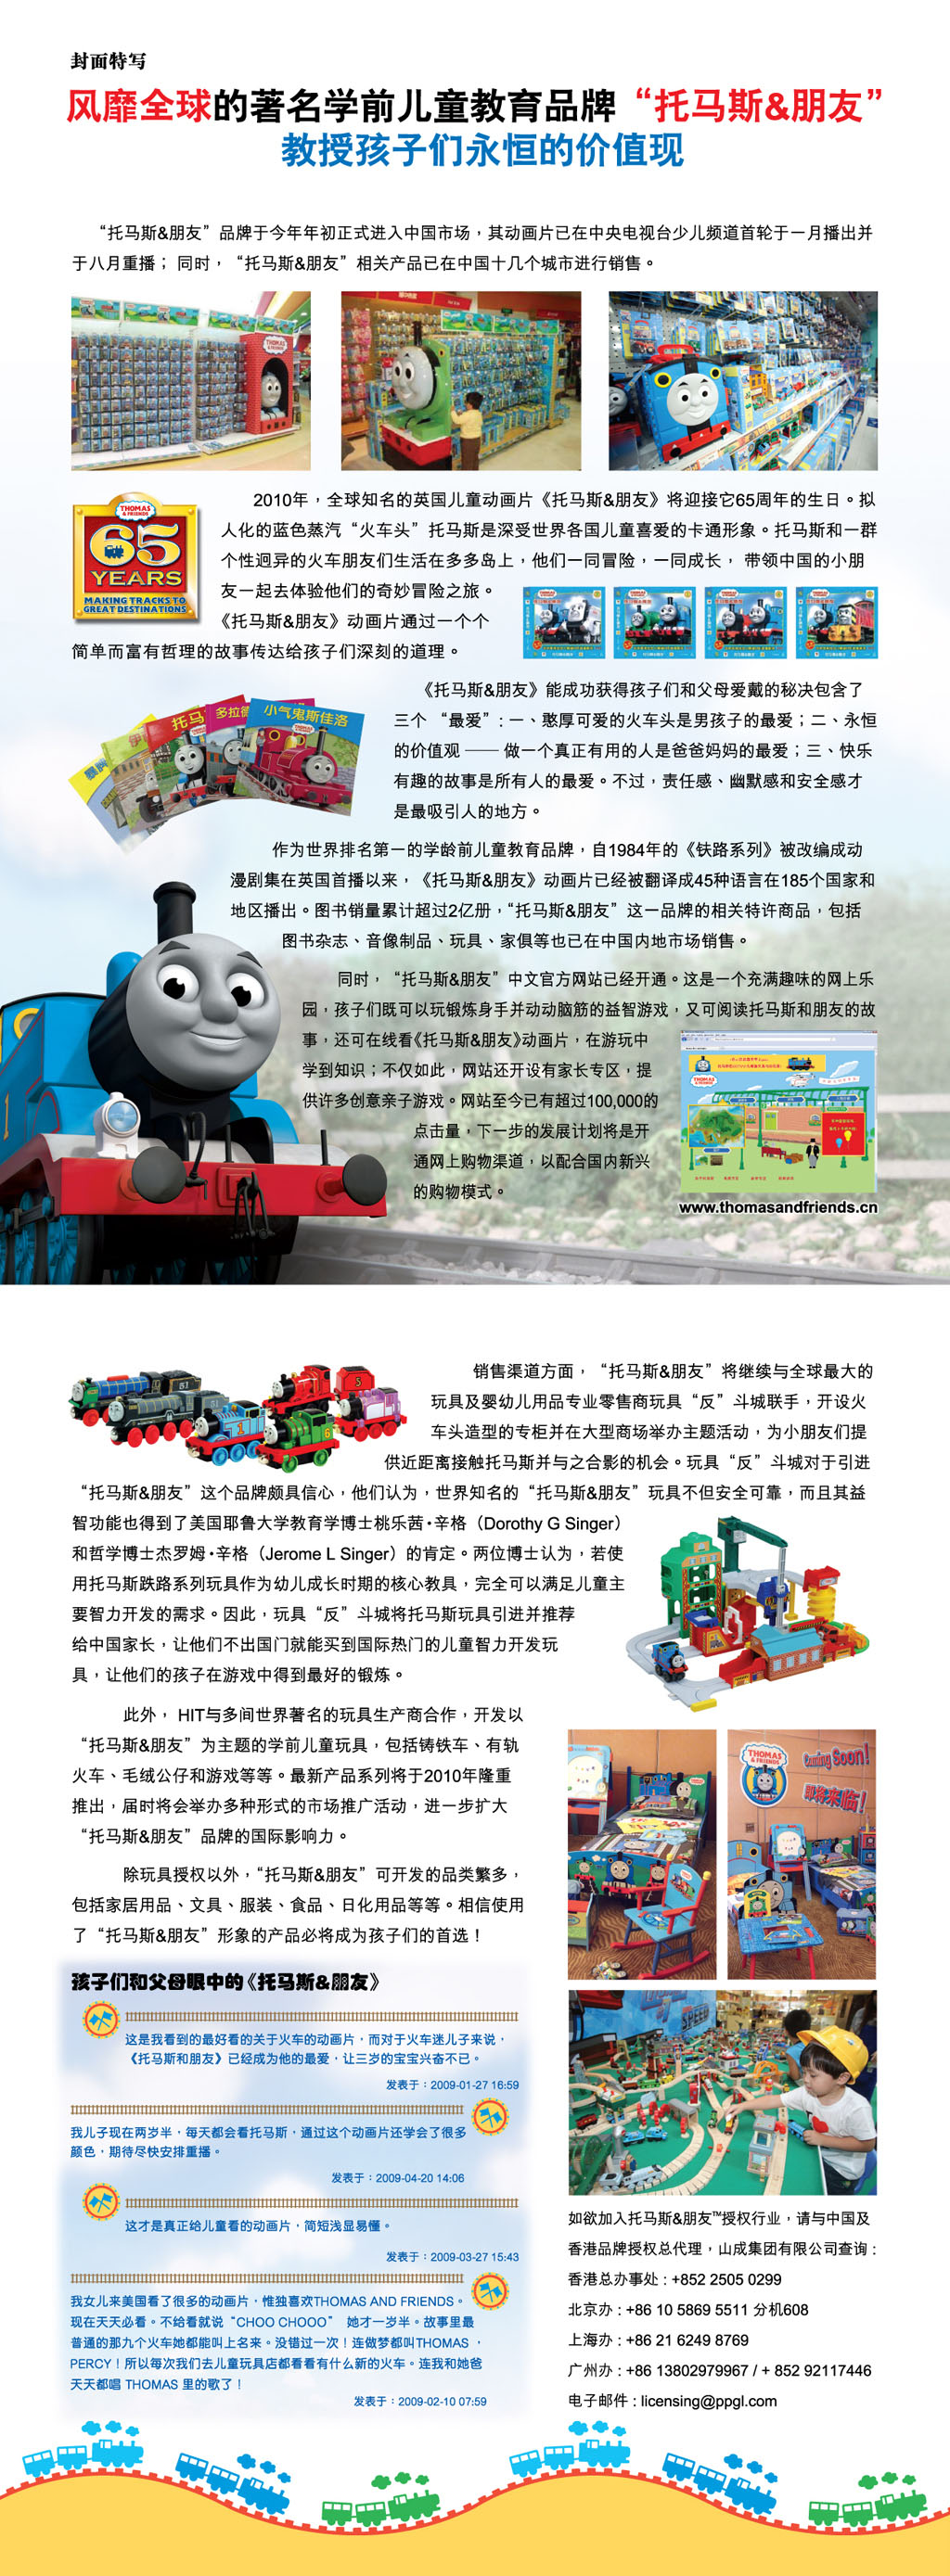 Thomas and Friends™ Licensing Agency